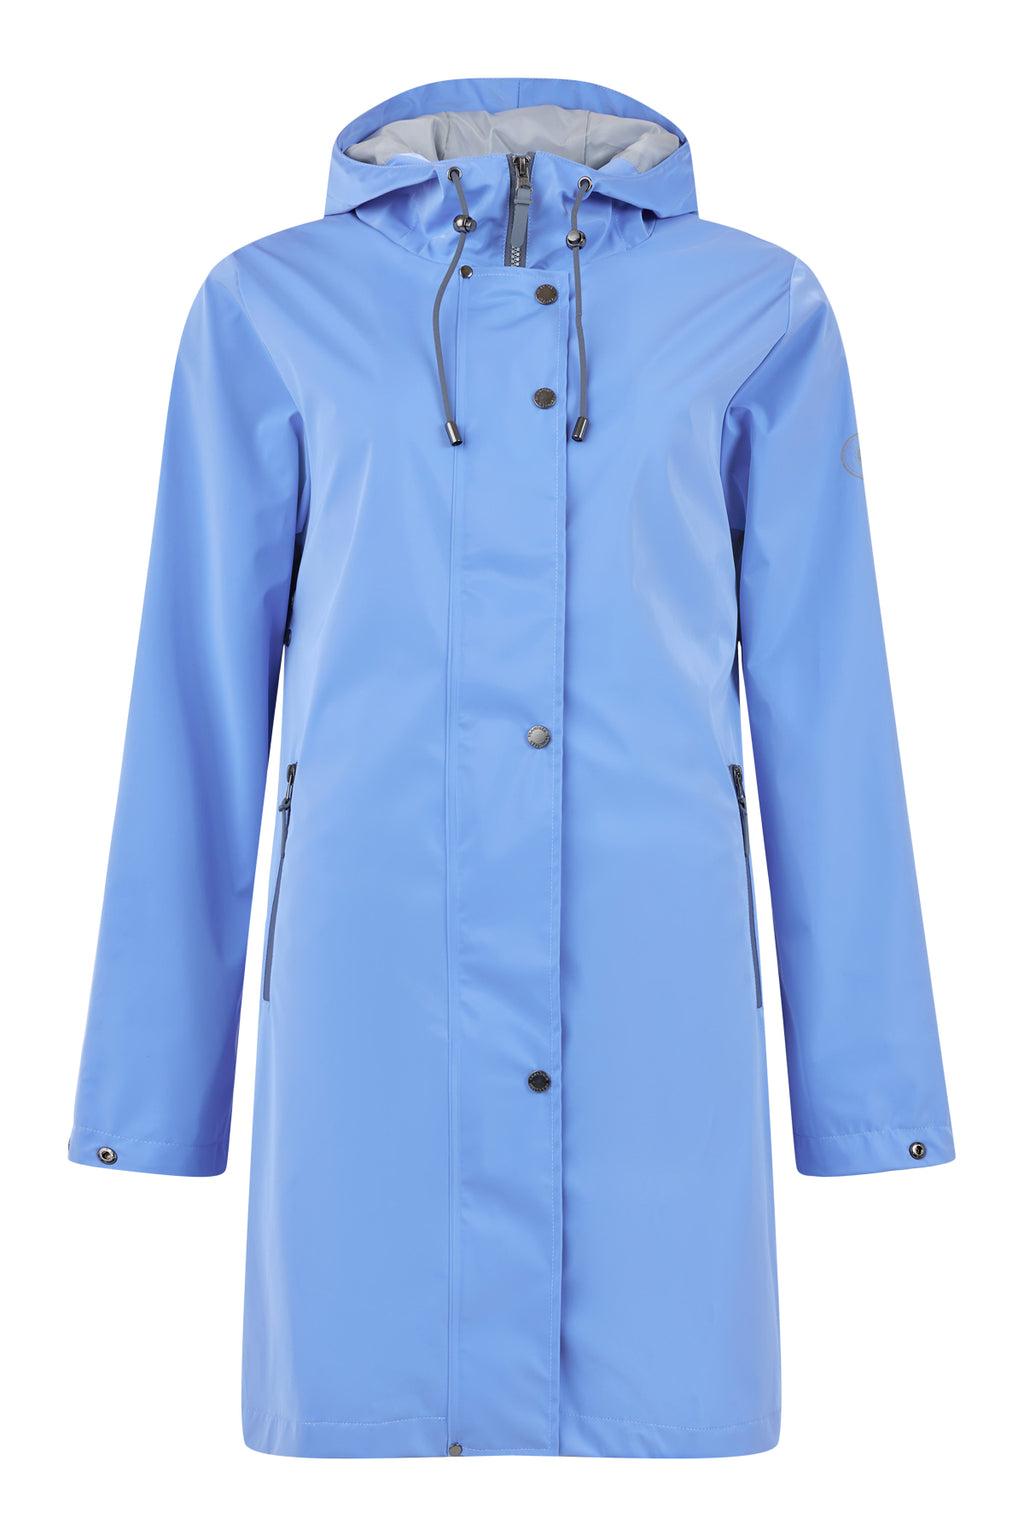 Frandsen wet look style raincoat with reflective strip at back in powder blue

Product code 875.295